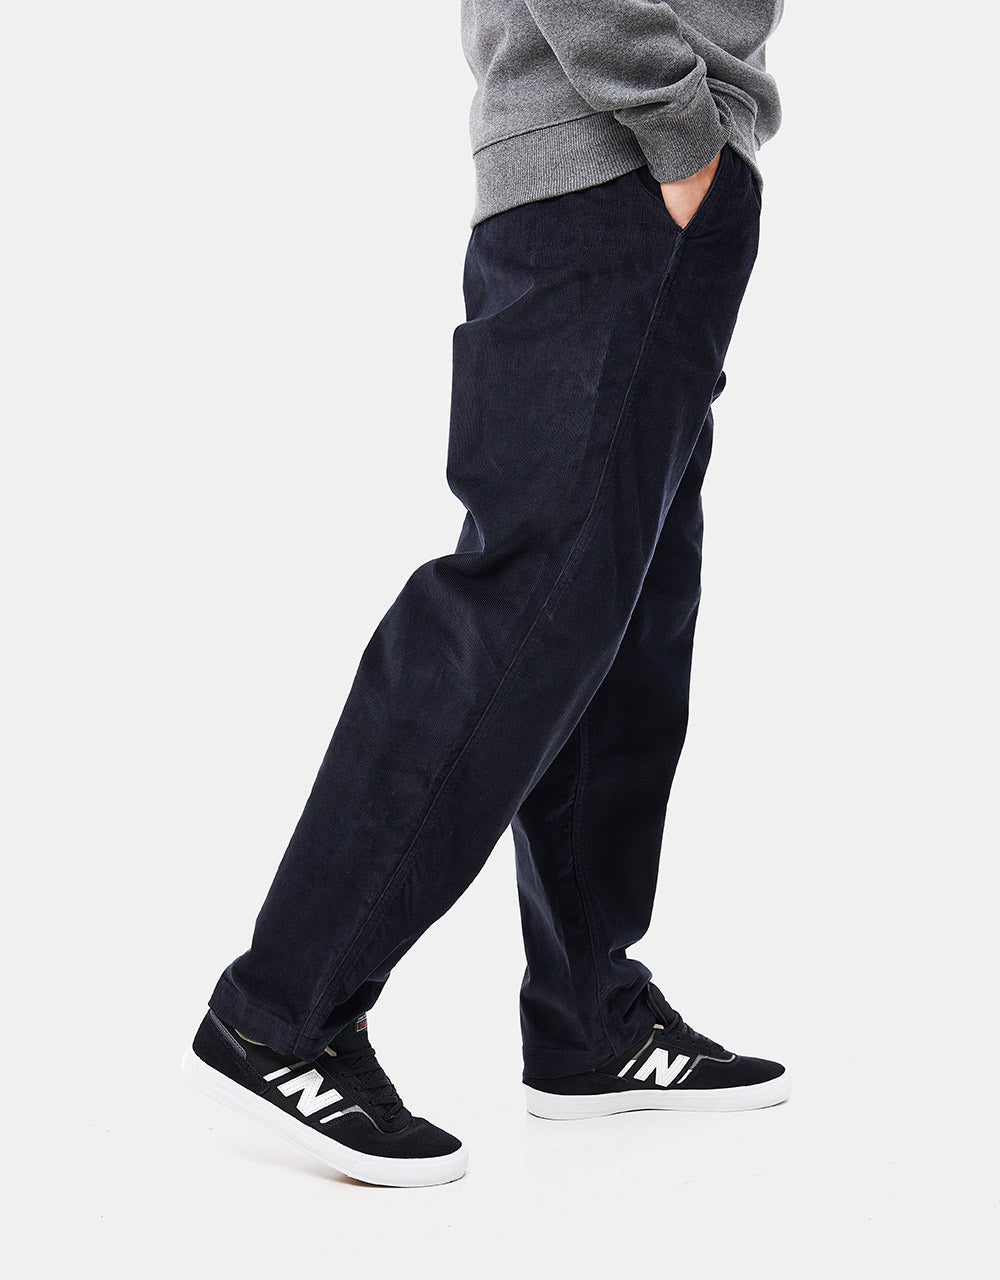 Levis Skateboarding Quick Release Pant - Anthracite Night